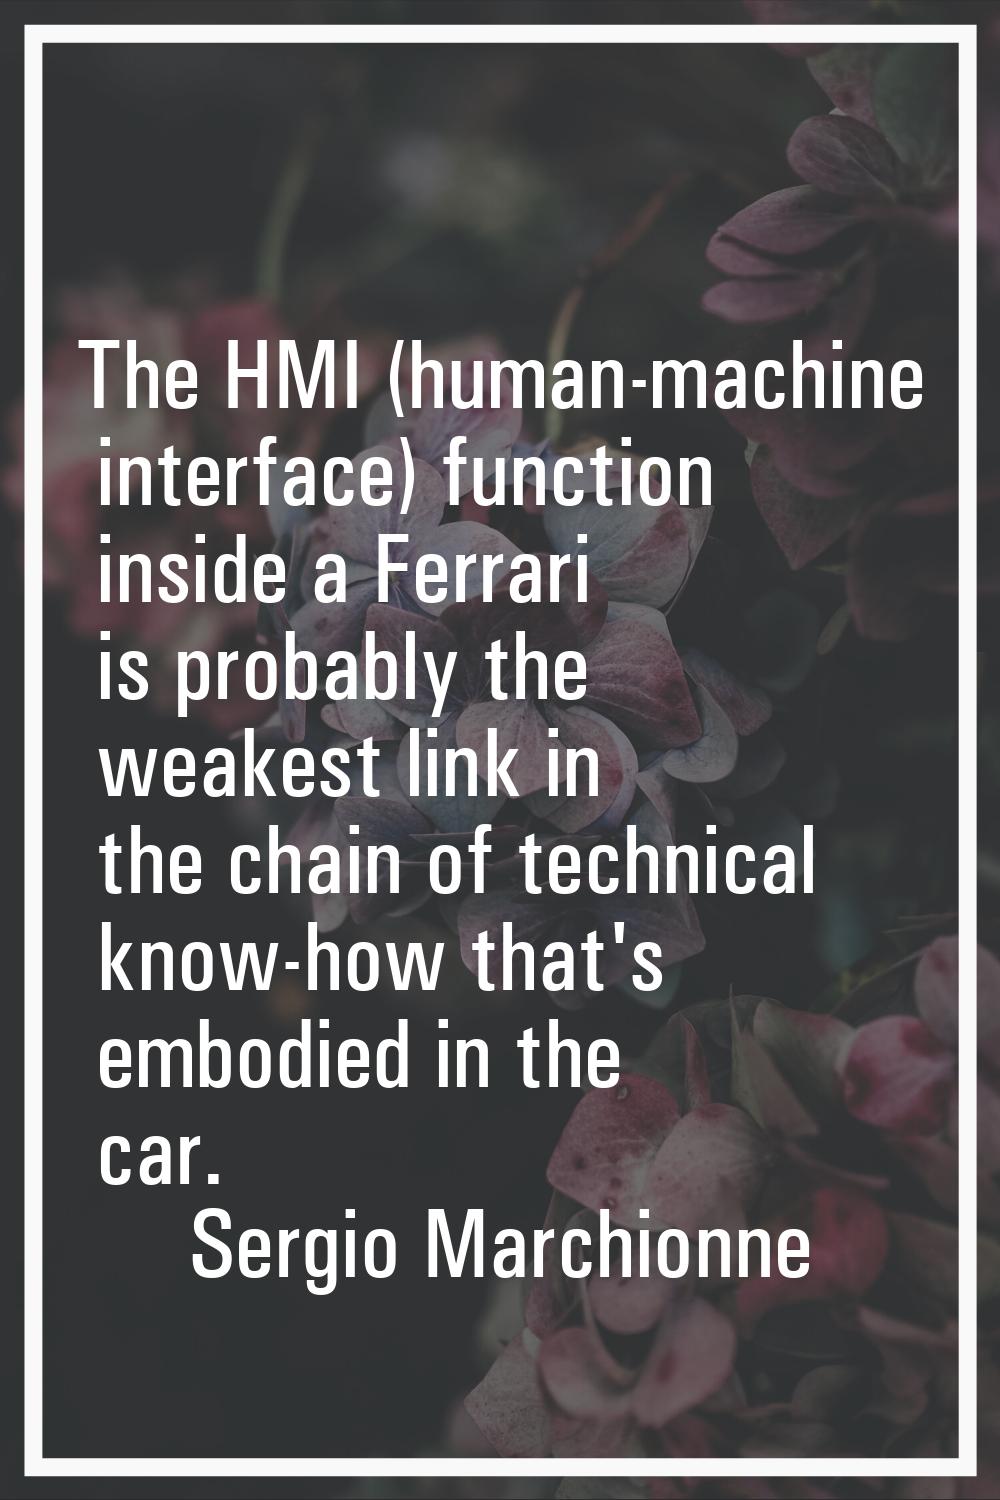 The HMI (human-machine interface) function inside a Ferrari is probably the weakest link in the cha